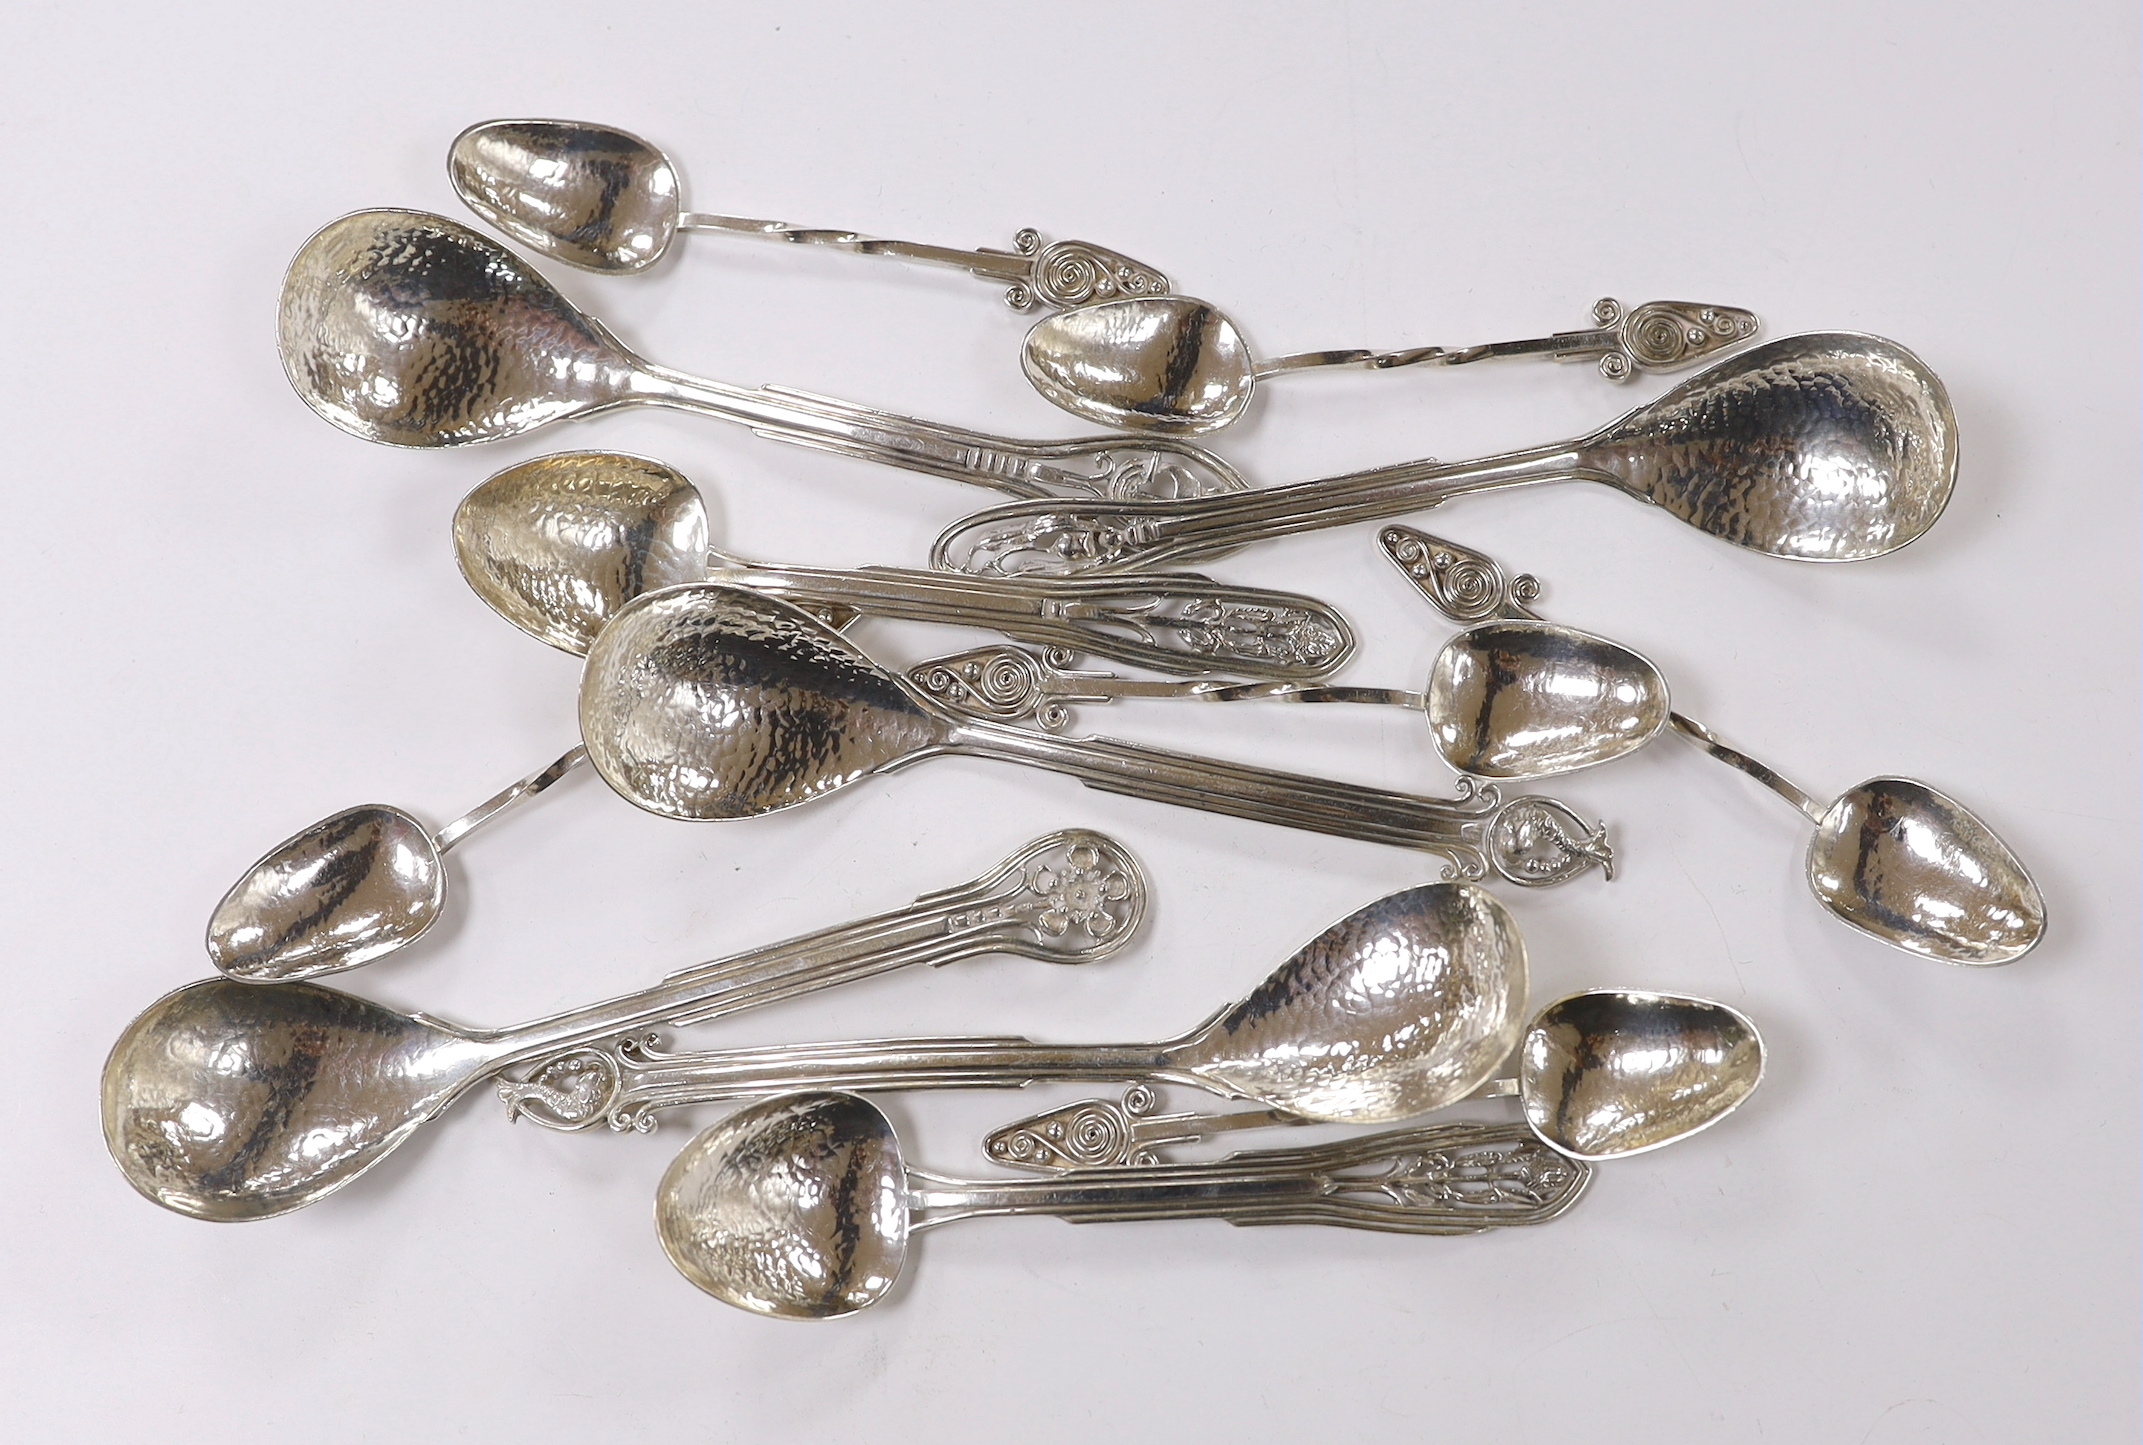 Seven Australian Arts & Crafts sterling spoons, by James A. Linton, with planished bowls and differing terminals, largest 15.2cm, together with a set of six Australian Arts & Crafts sterling small spoons, one with maker'